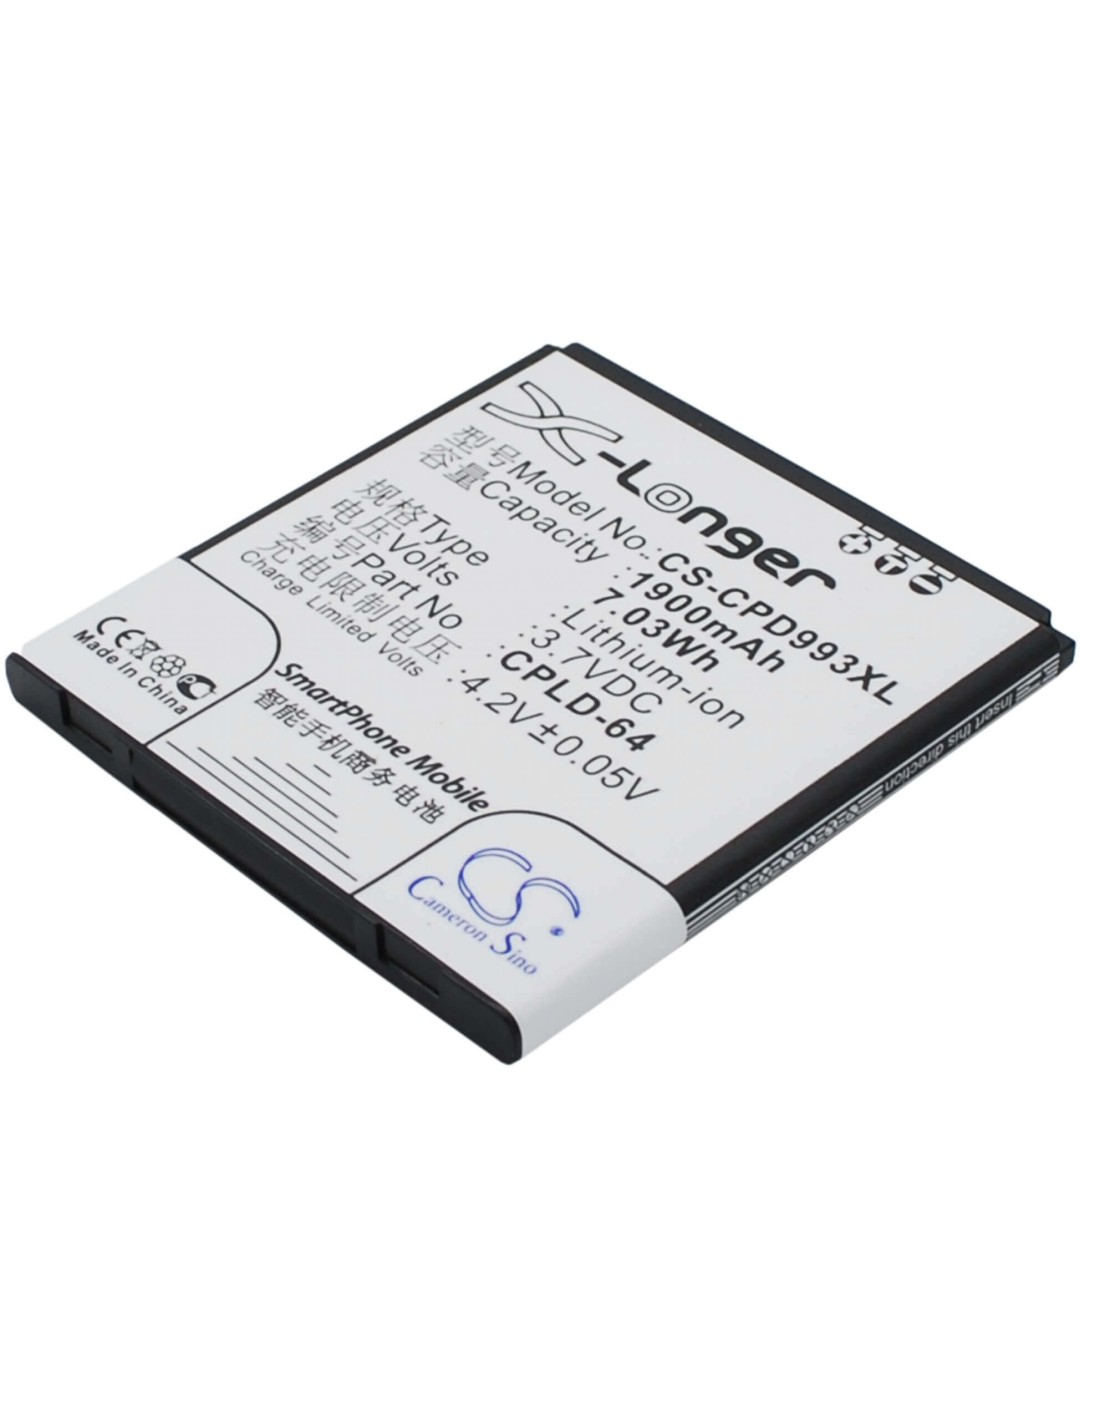 Battery for Coolpad 9930, W702 3.7V, 1900mAh - 7.03Wh